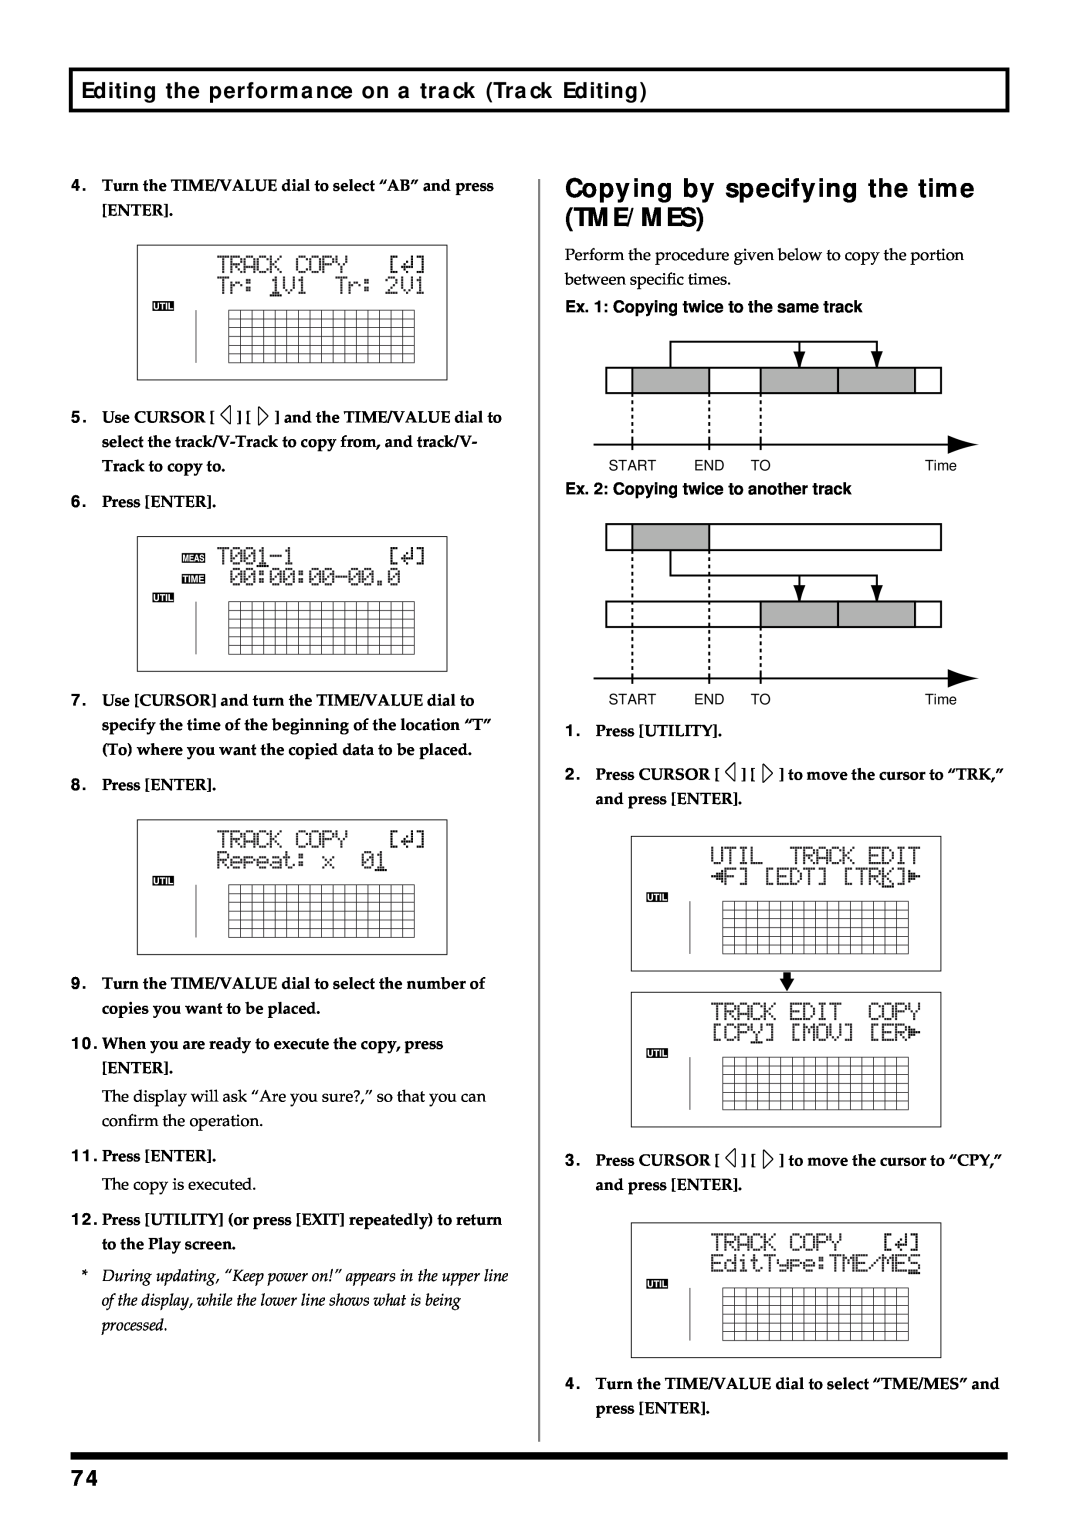 Roland BR-864 owner manual Copying by specifying the time TME/MES, Editing the performance on a track Track Editing 